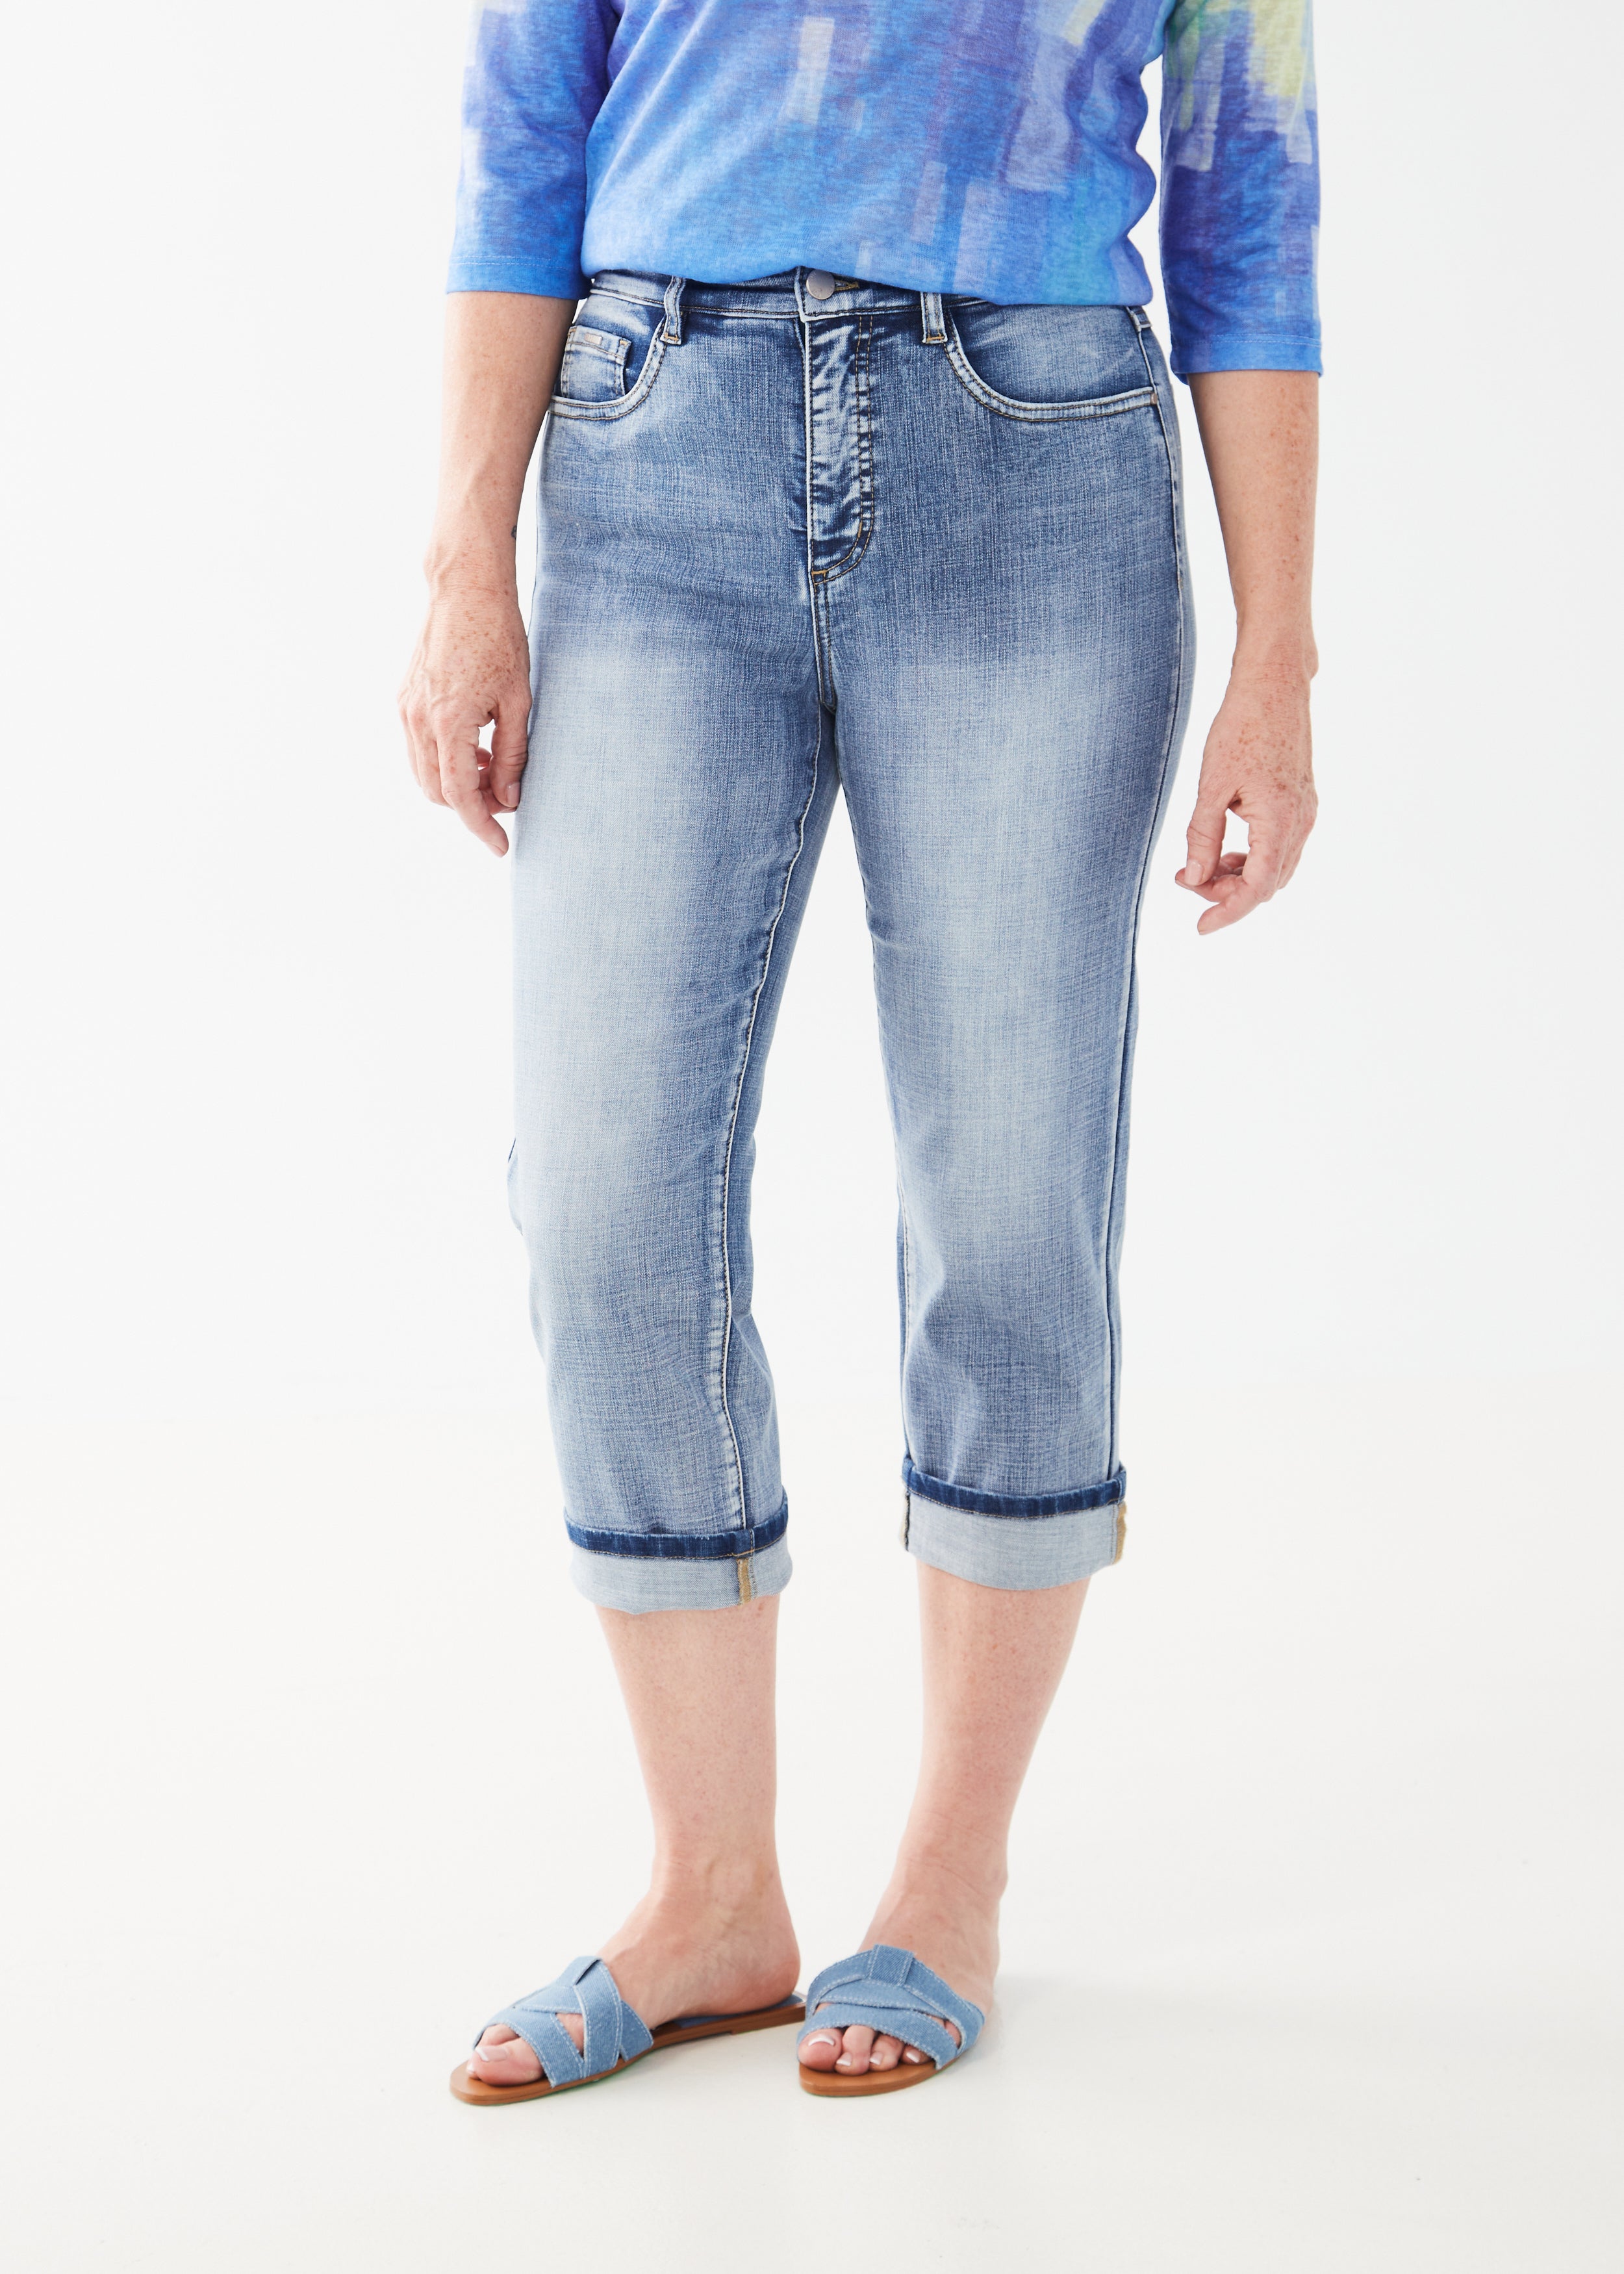 Introducing the FDJ Suzanne Capri, made from high-quality denim in a medium vintage wash.